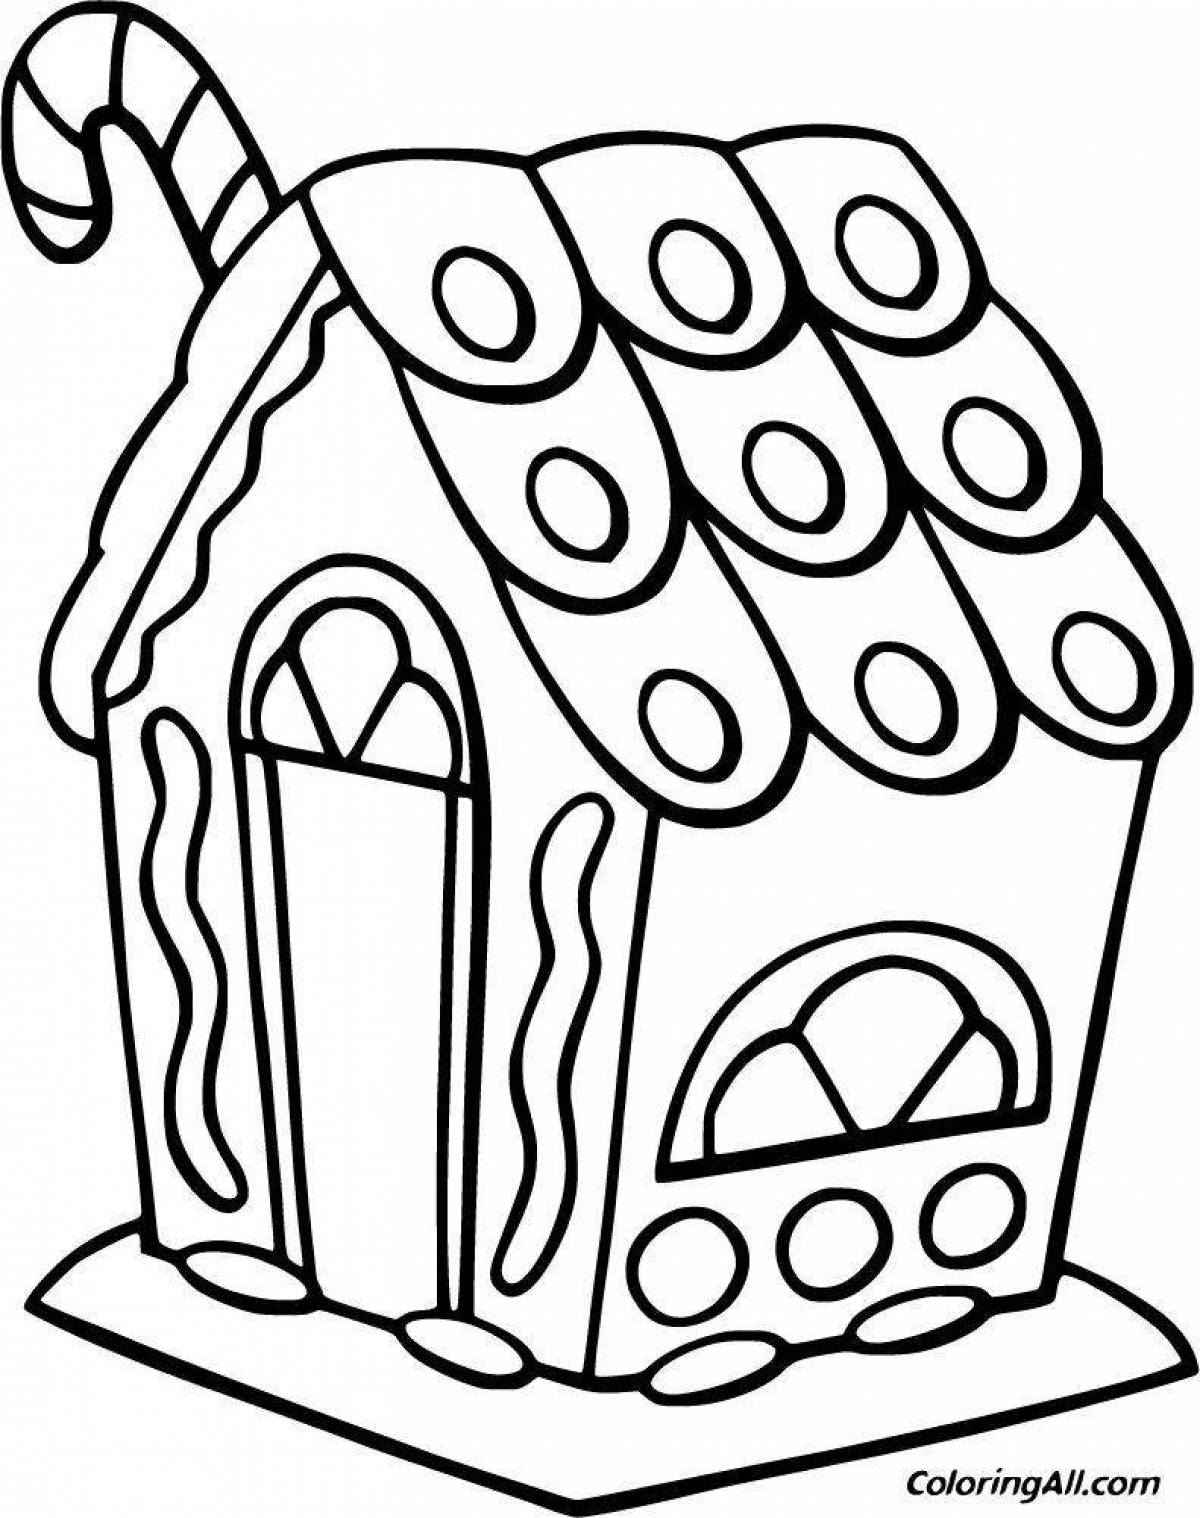 Glorious gingerbread house coloring book